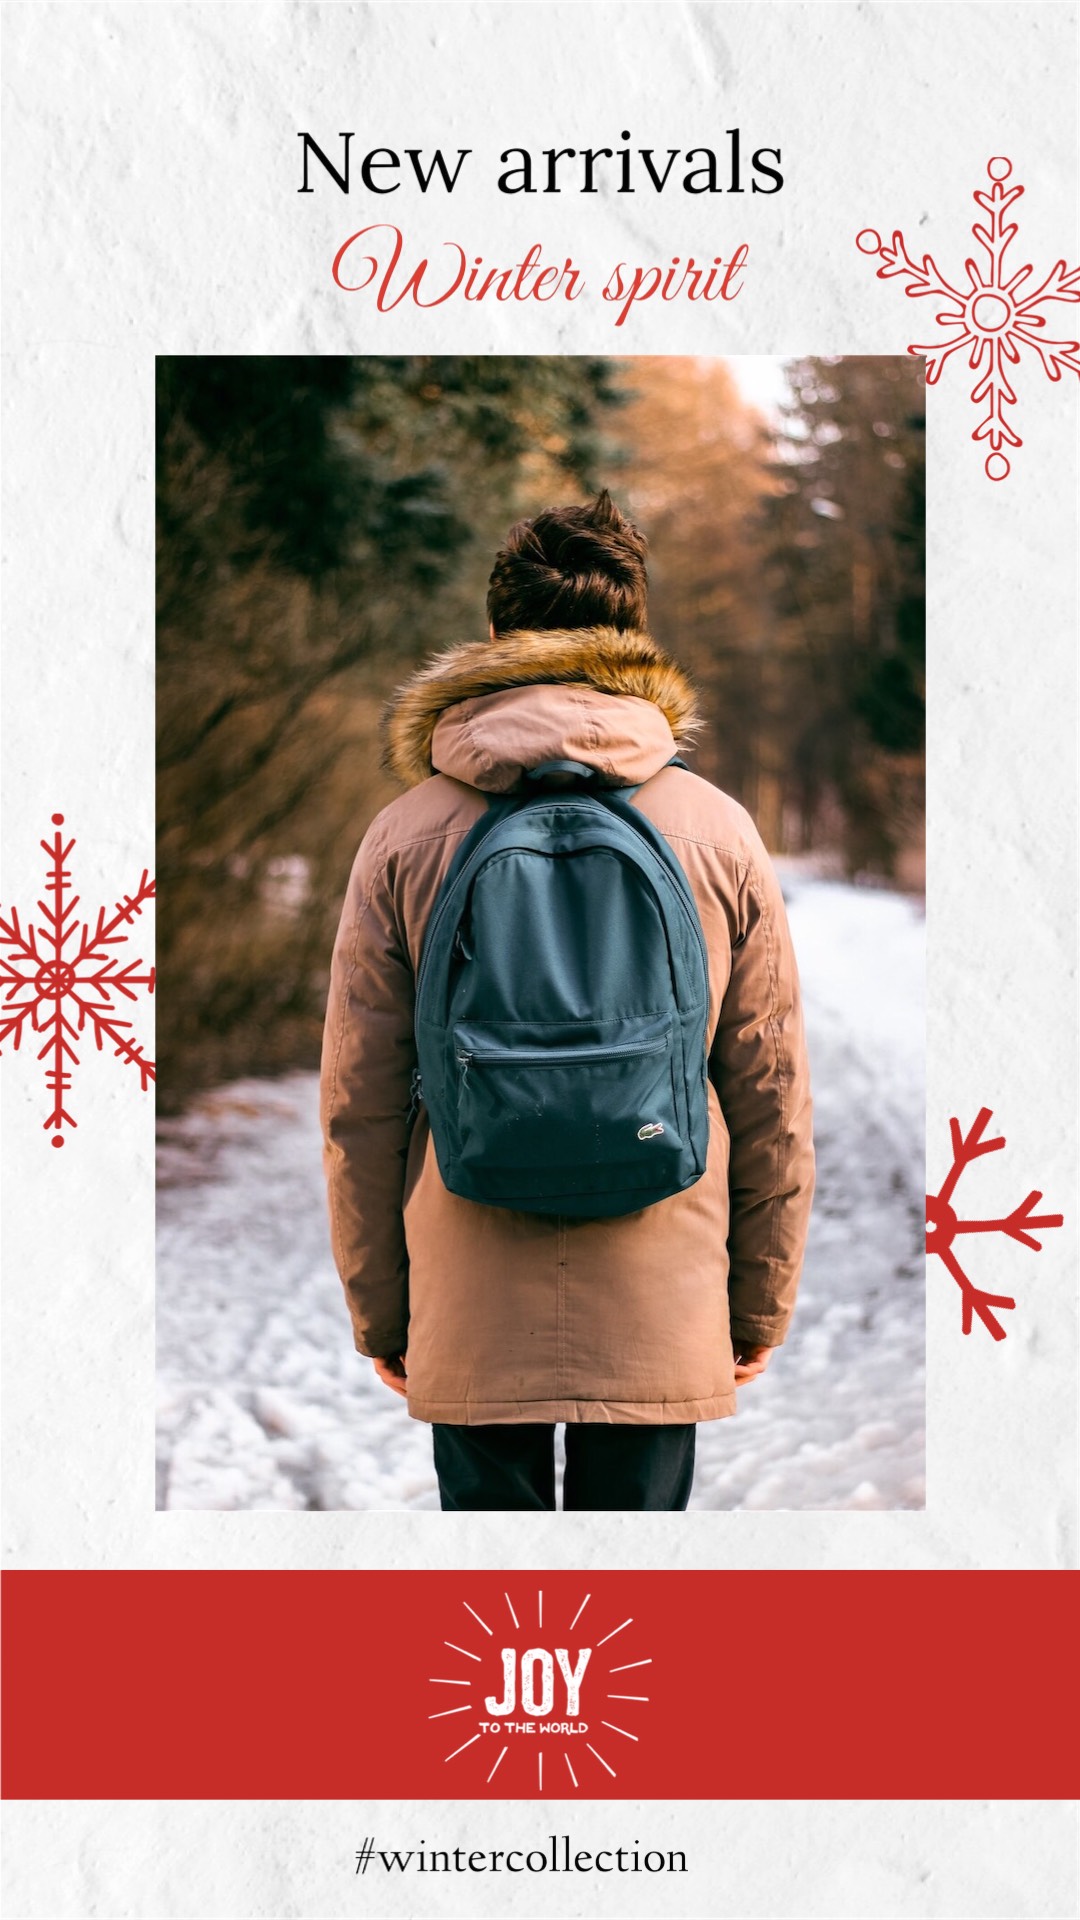 Winter looks and snow fashion instagram story template